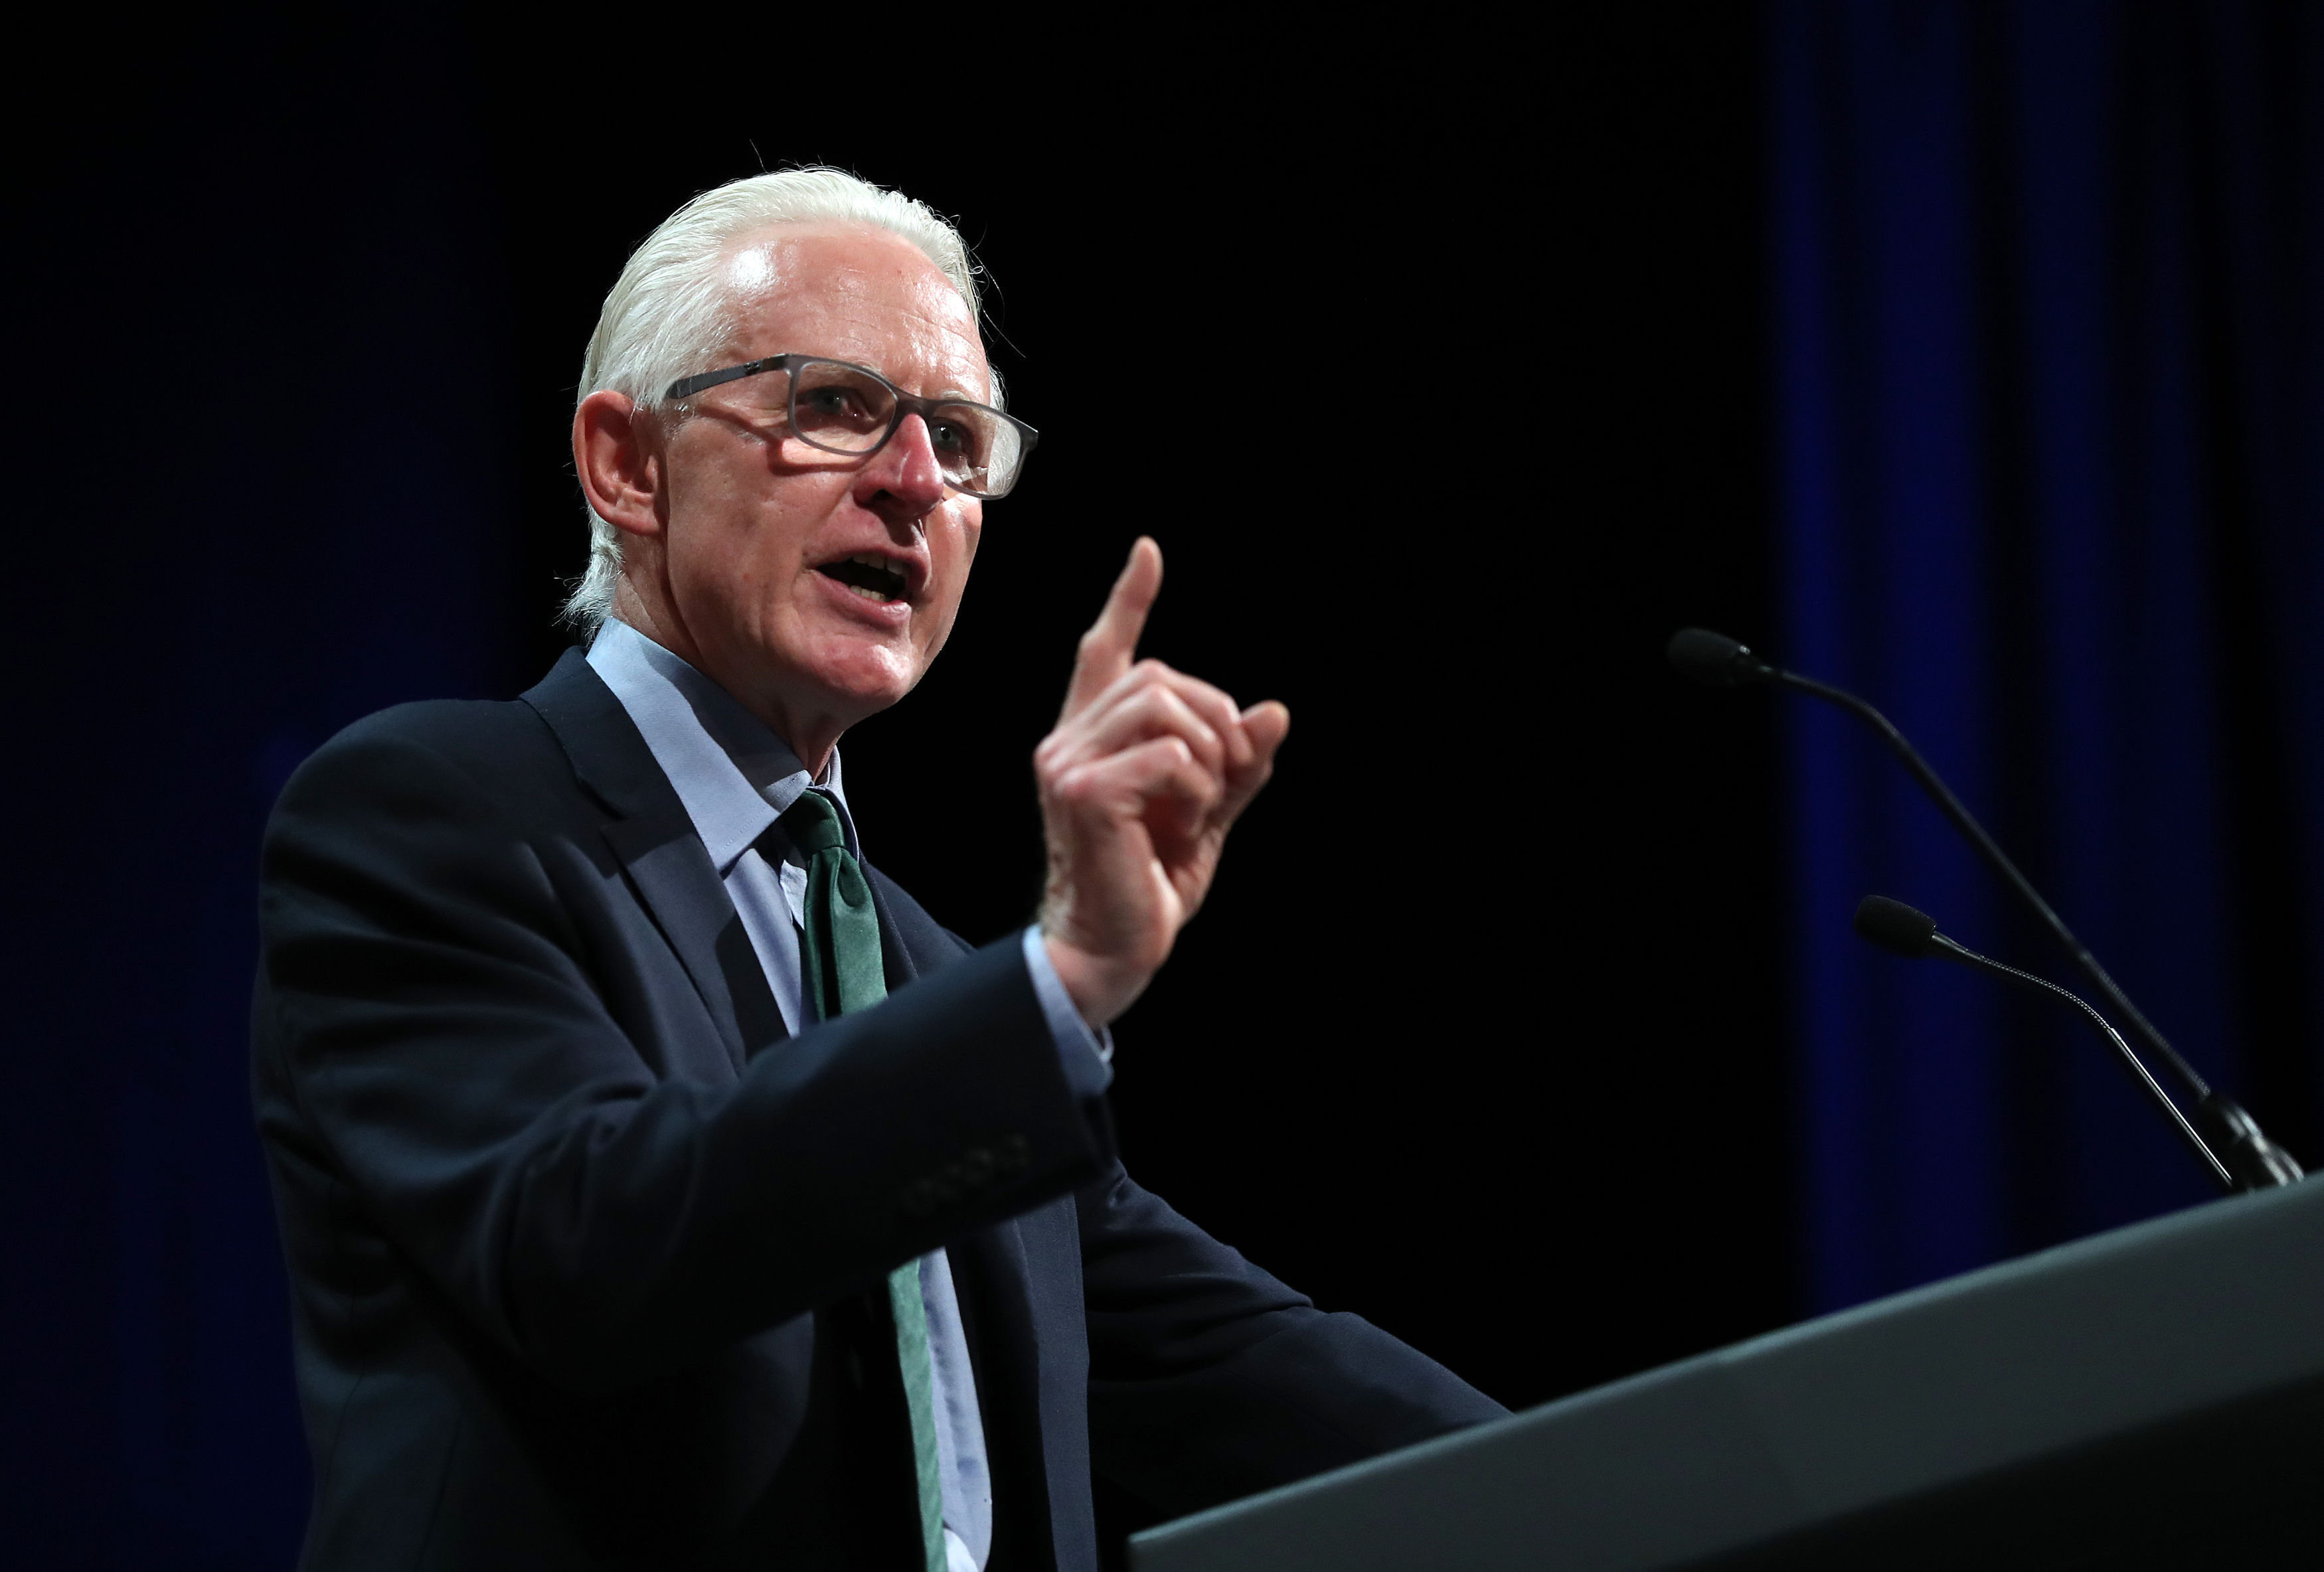 Norman Lamb says the government is failing young people.